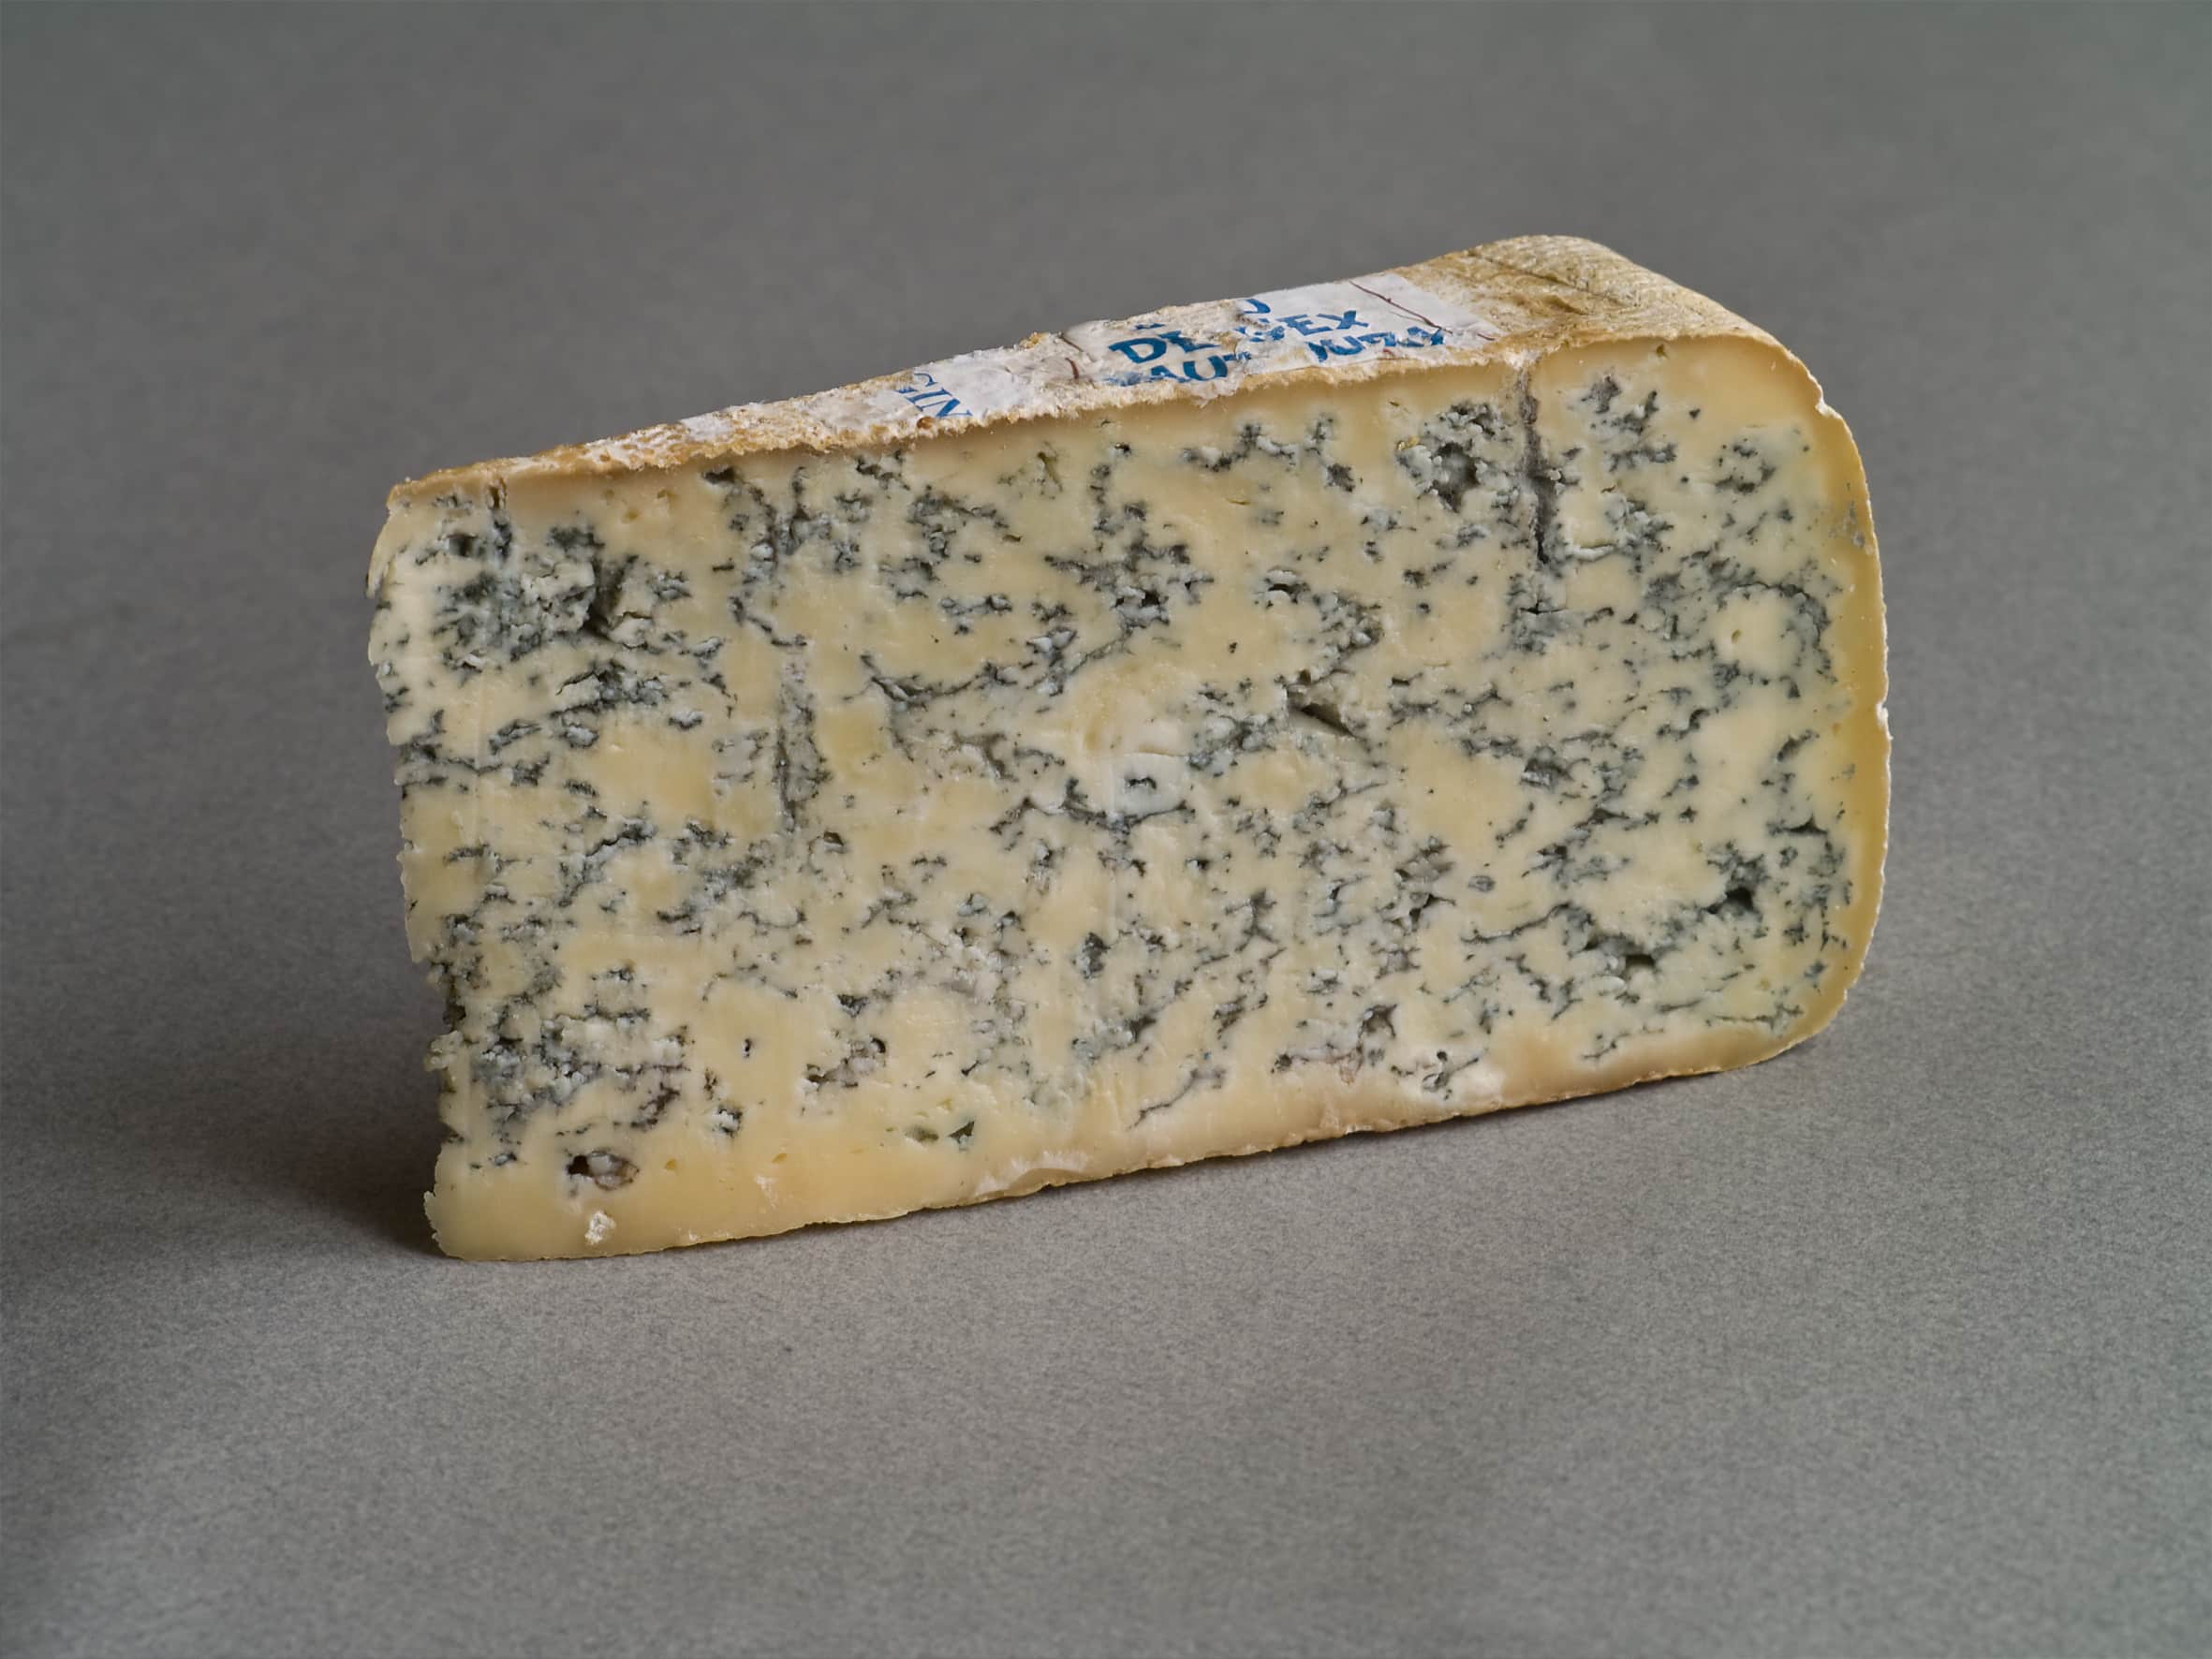 Does Blue Cheese Have Mold